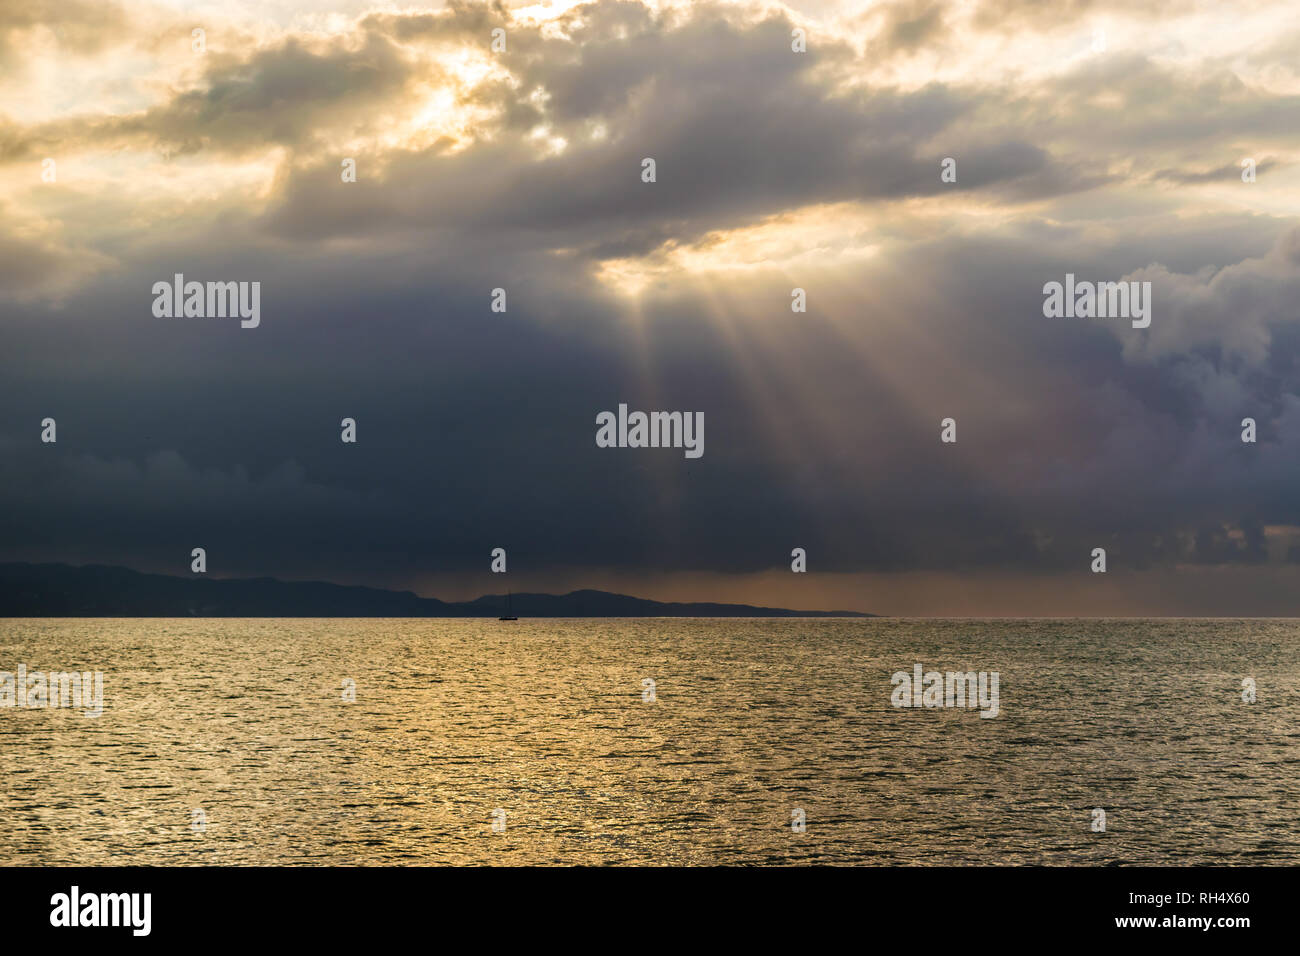 Scenic landscape ocean mountain silhouette view of sun rays bursting through clouds. Concept of breakthrough, hope, signs. Stock Photo